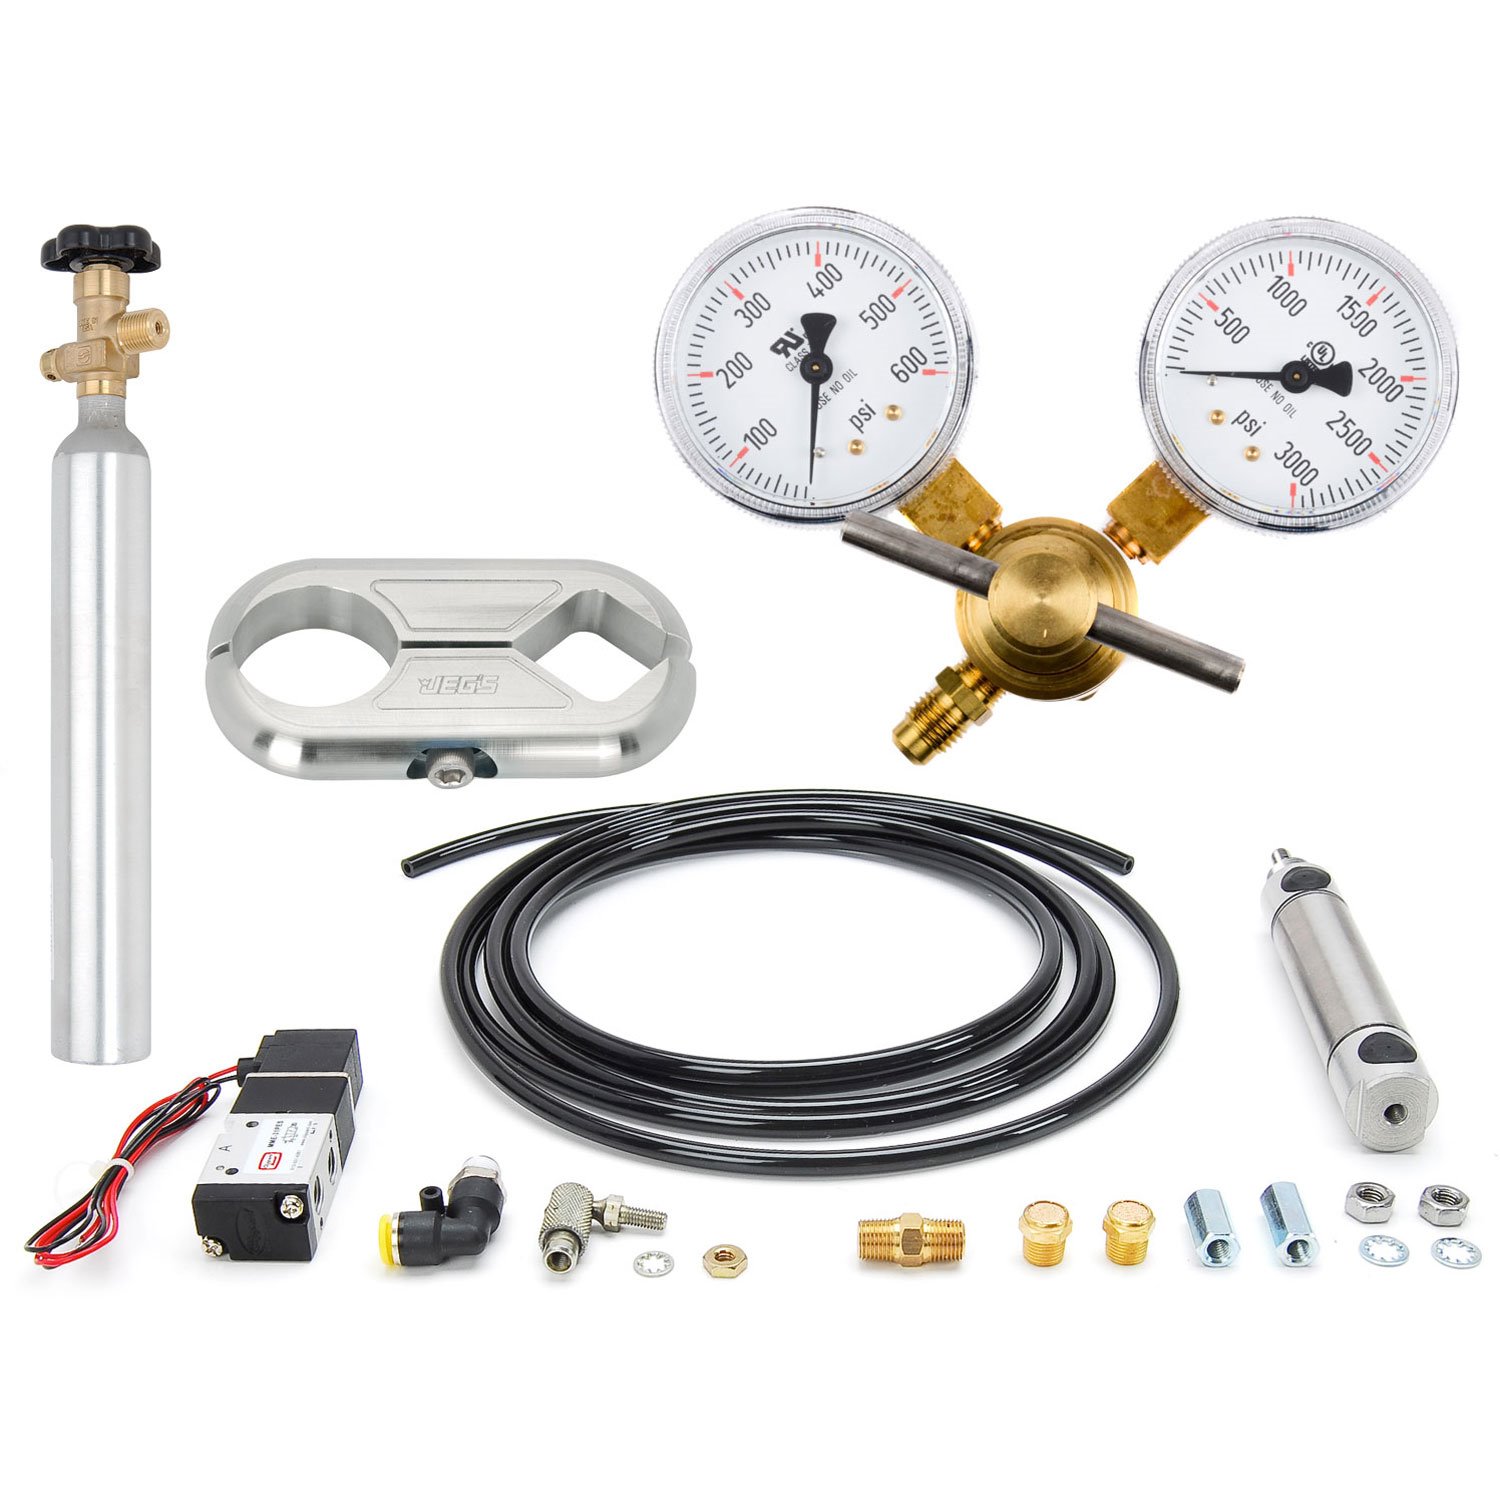 CO2 Throttle Stop & Starting Line Control Kit